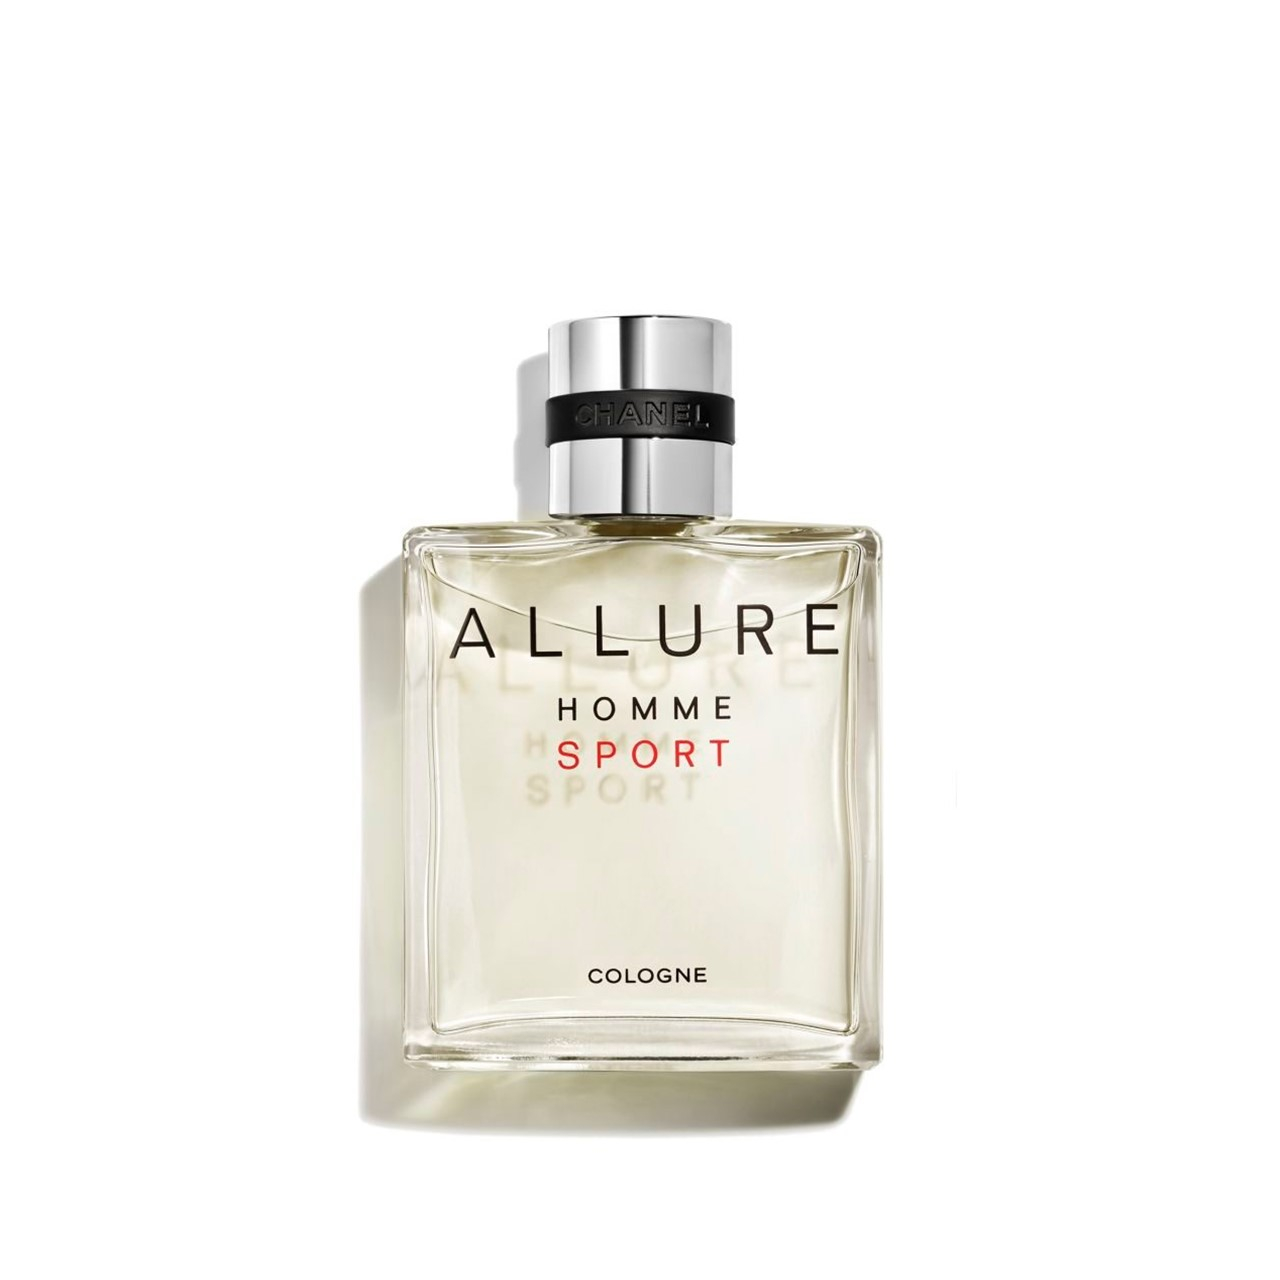 Cologne　Sport　Allure　Homme　Turkey　Buy　·　CHANEL　100ml